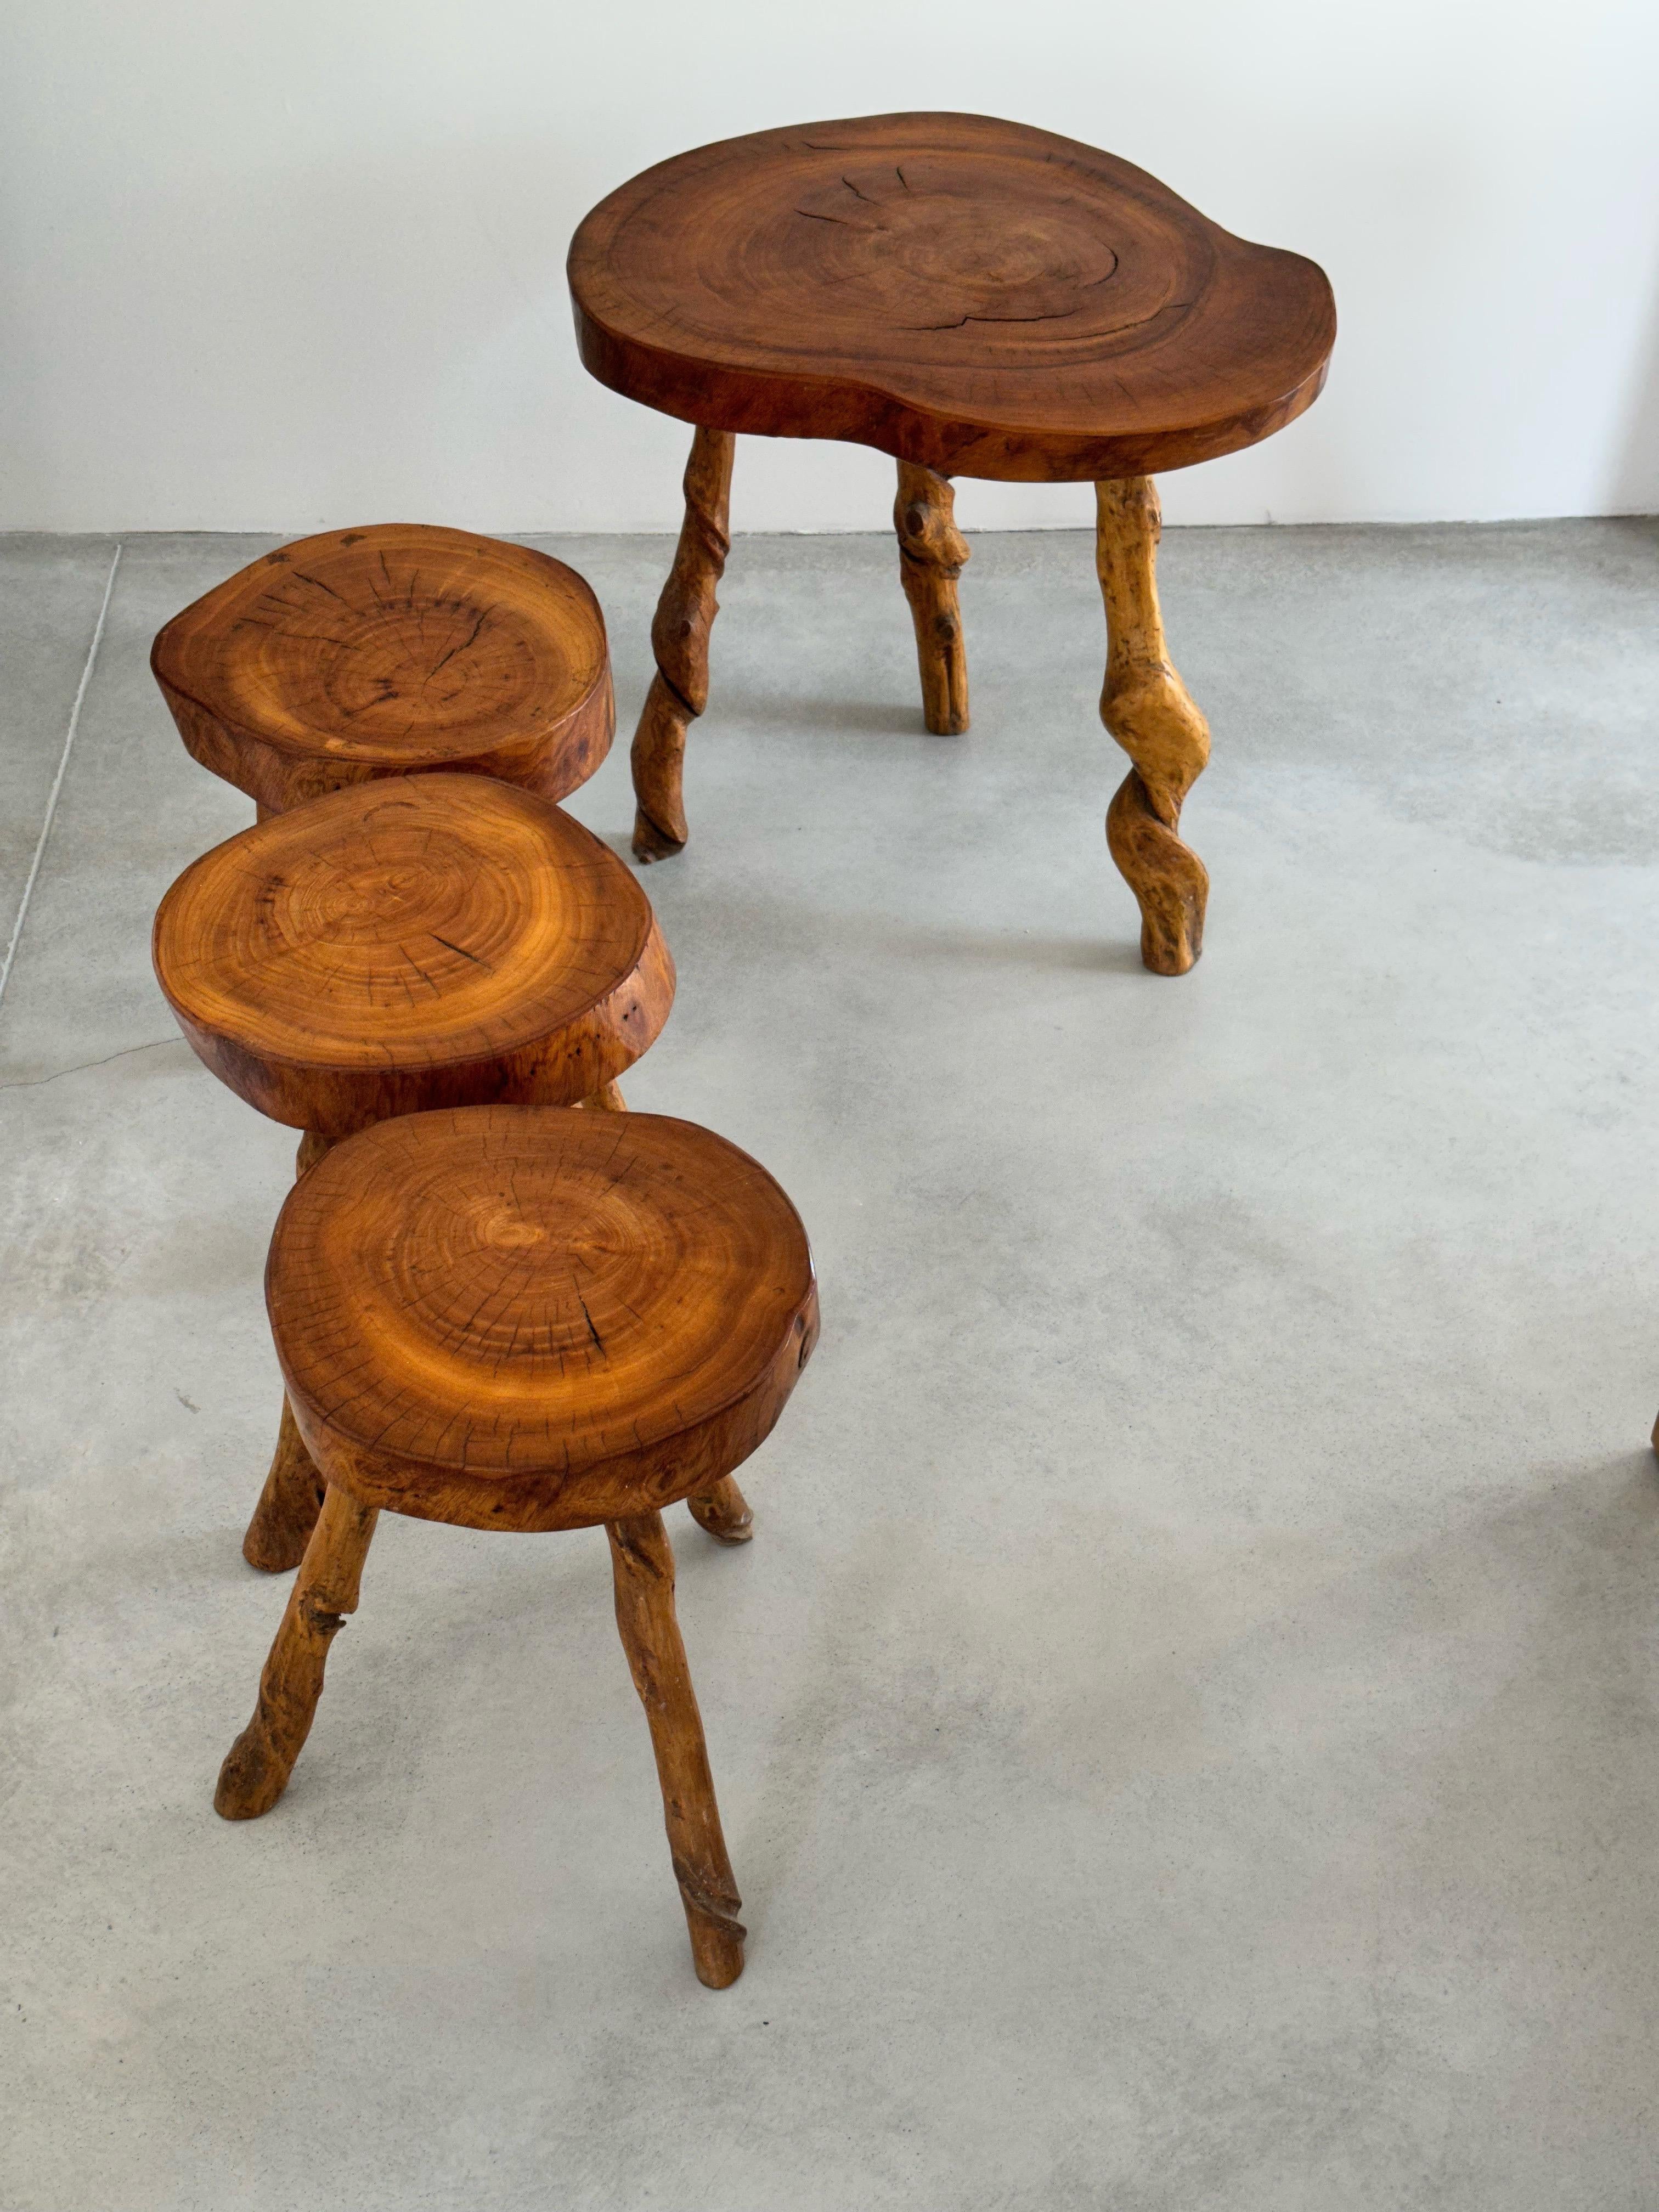 French Brutalist Set of 3 Low Stools and 1 Coffee Table, Solid Wood, France, 1960s For Sale